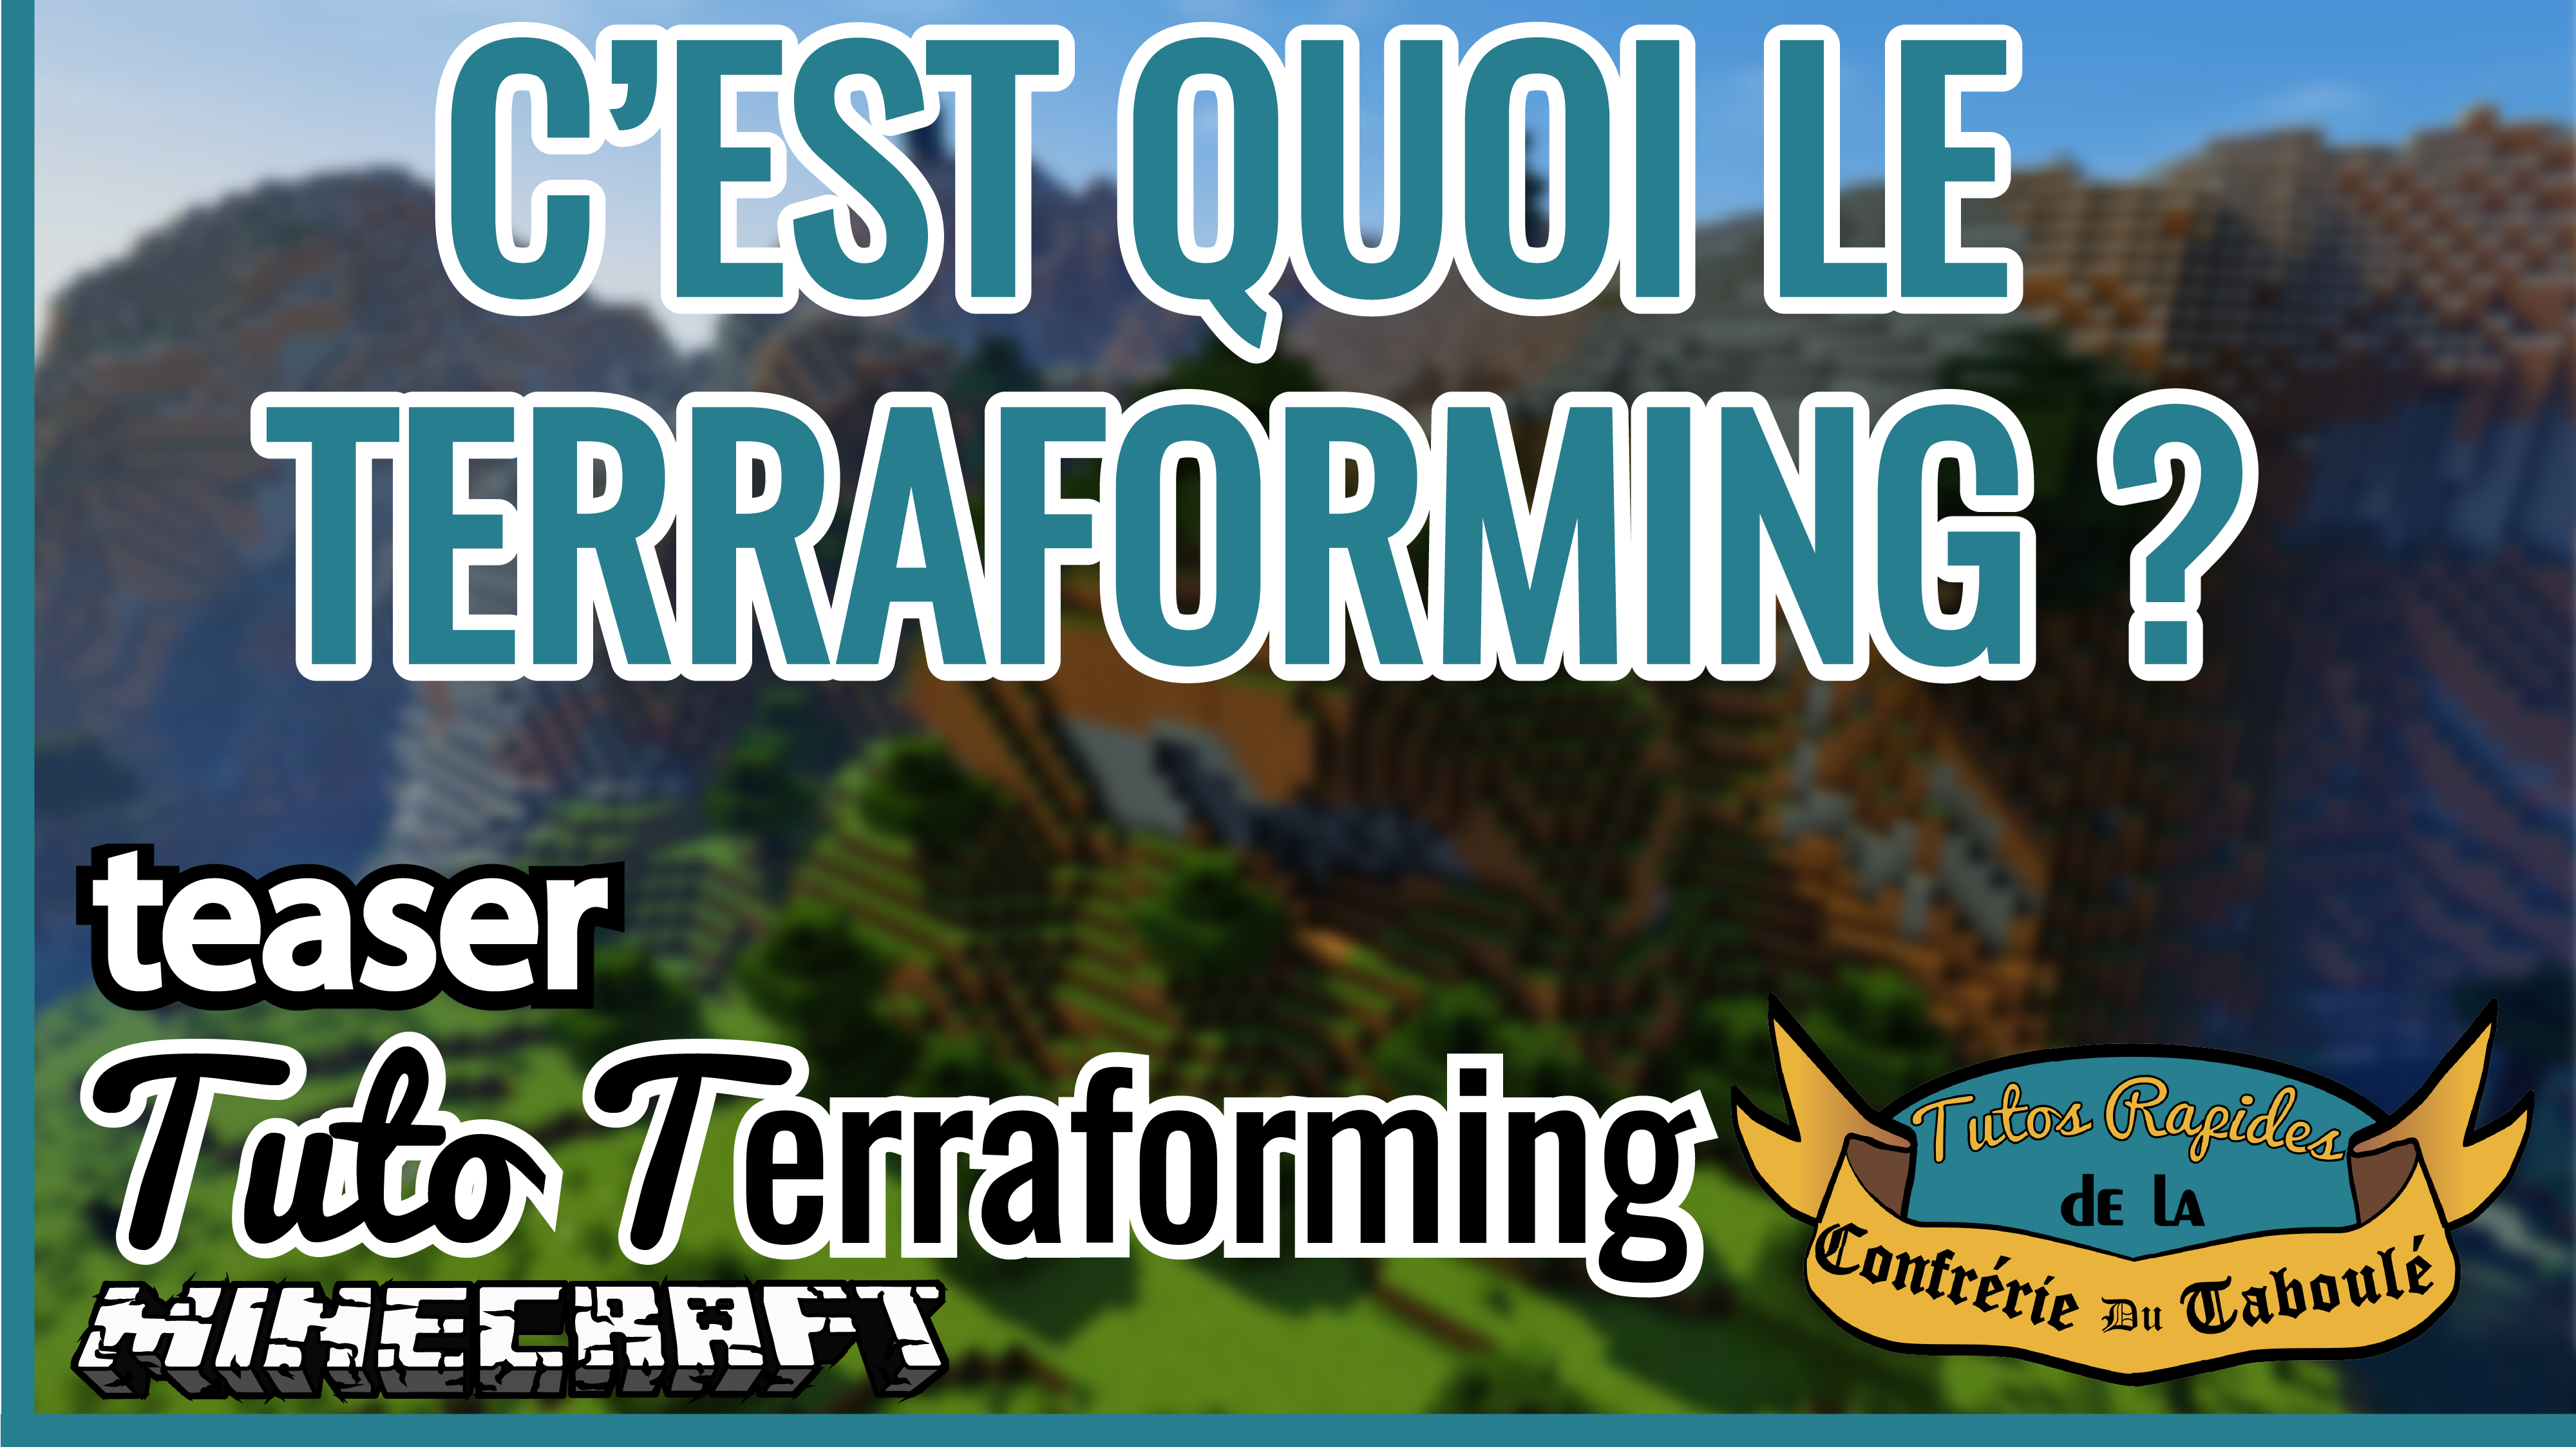 You are currently viewing C’EST QUOI LE TERRAFORMING ? Teaser Tuto Terraforming Minecraft